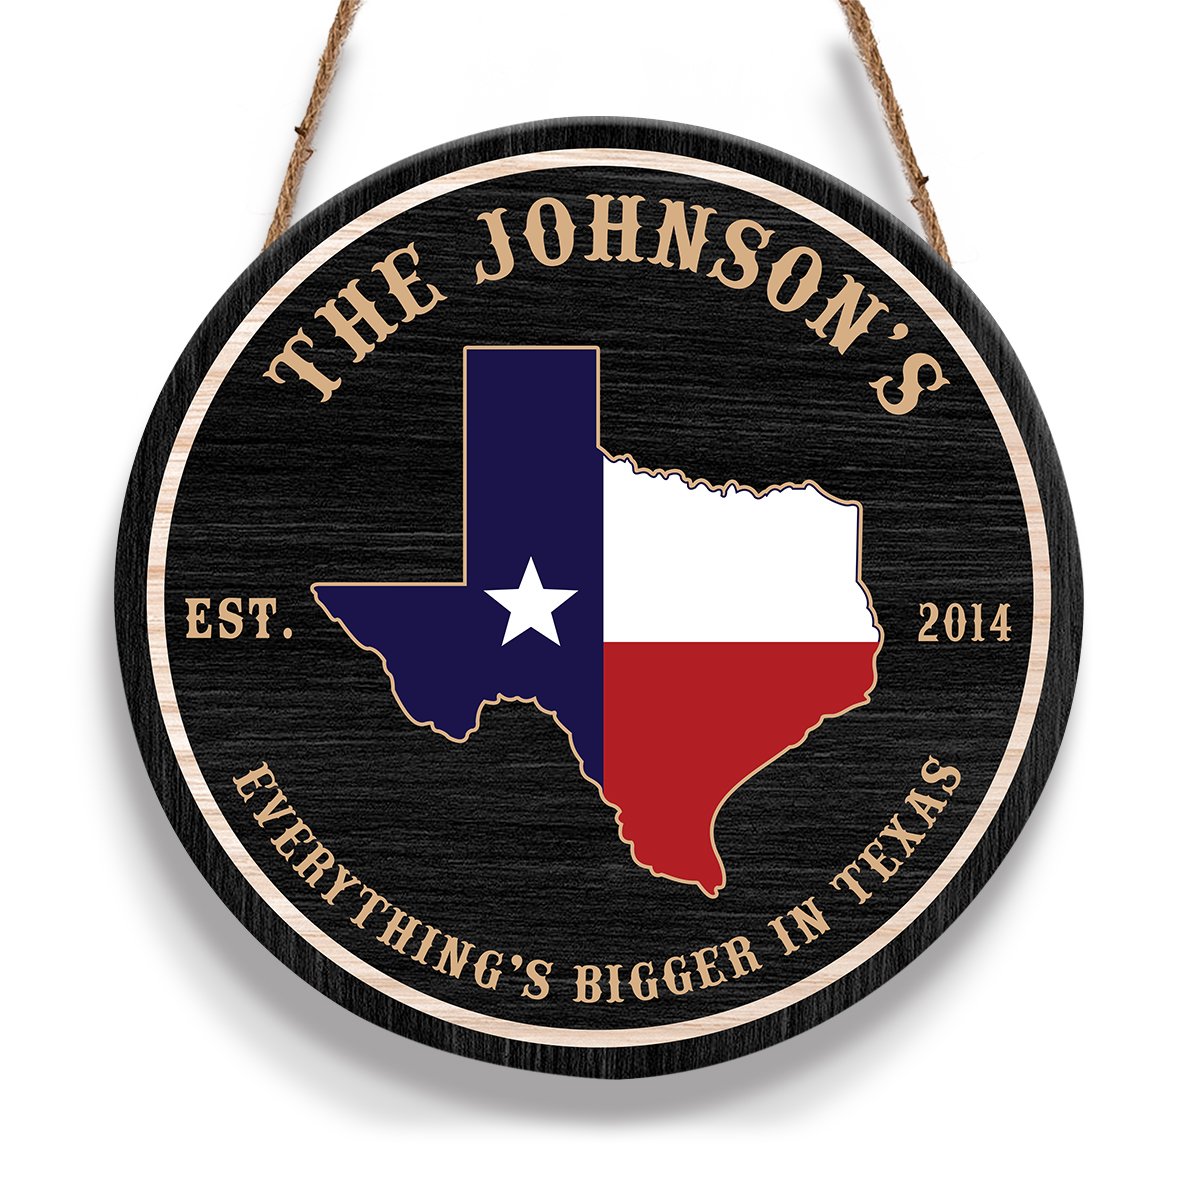 Everything's Bigger In Texas Family Personalizedwitch Personalized Round Wood Sign Outdoor Decor